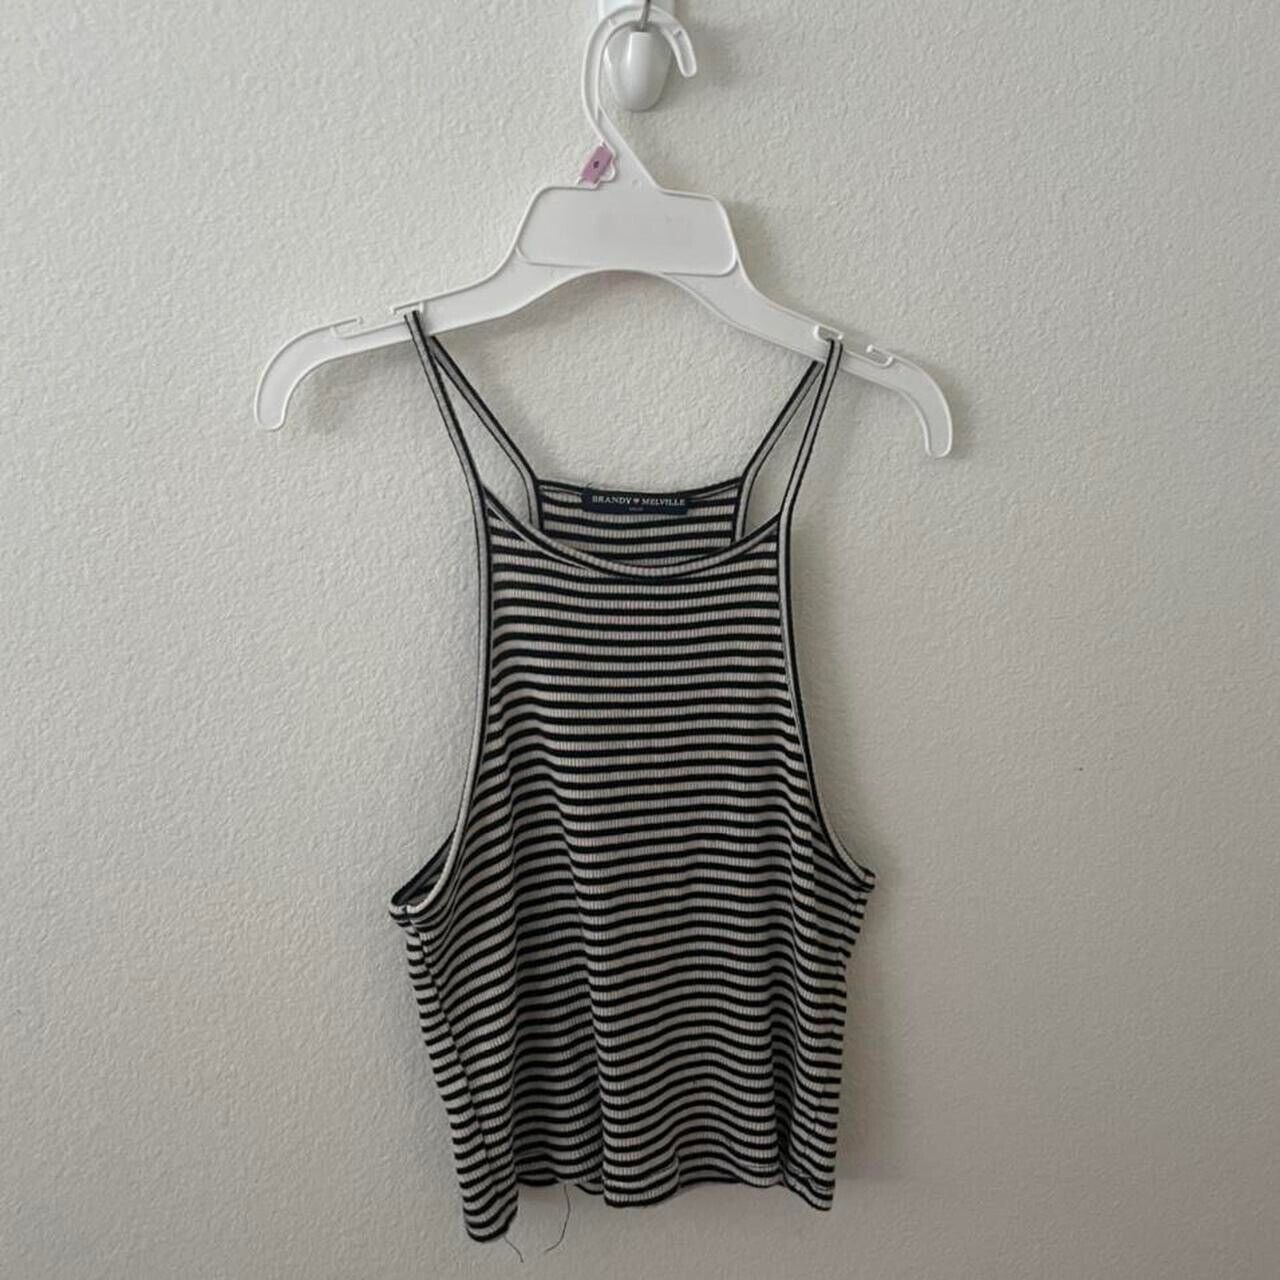 Brandy Melville Striped Black and White Tank Top - image 4